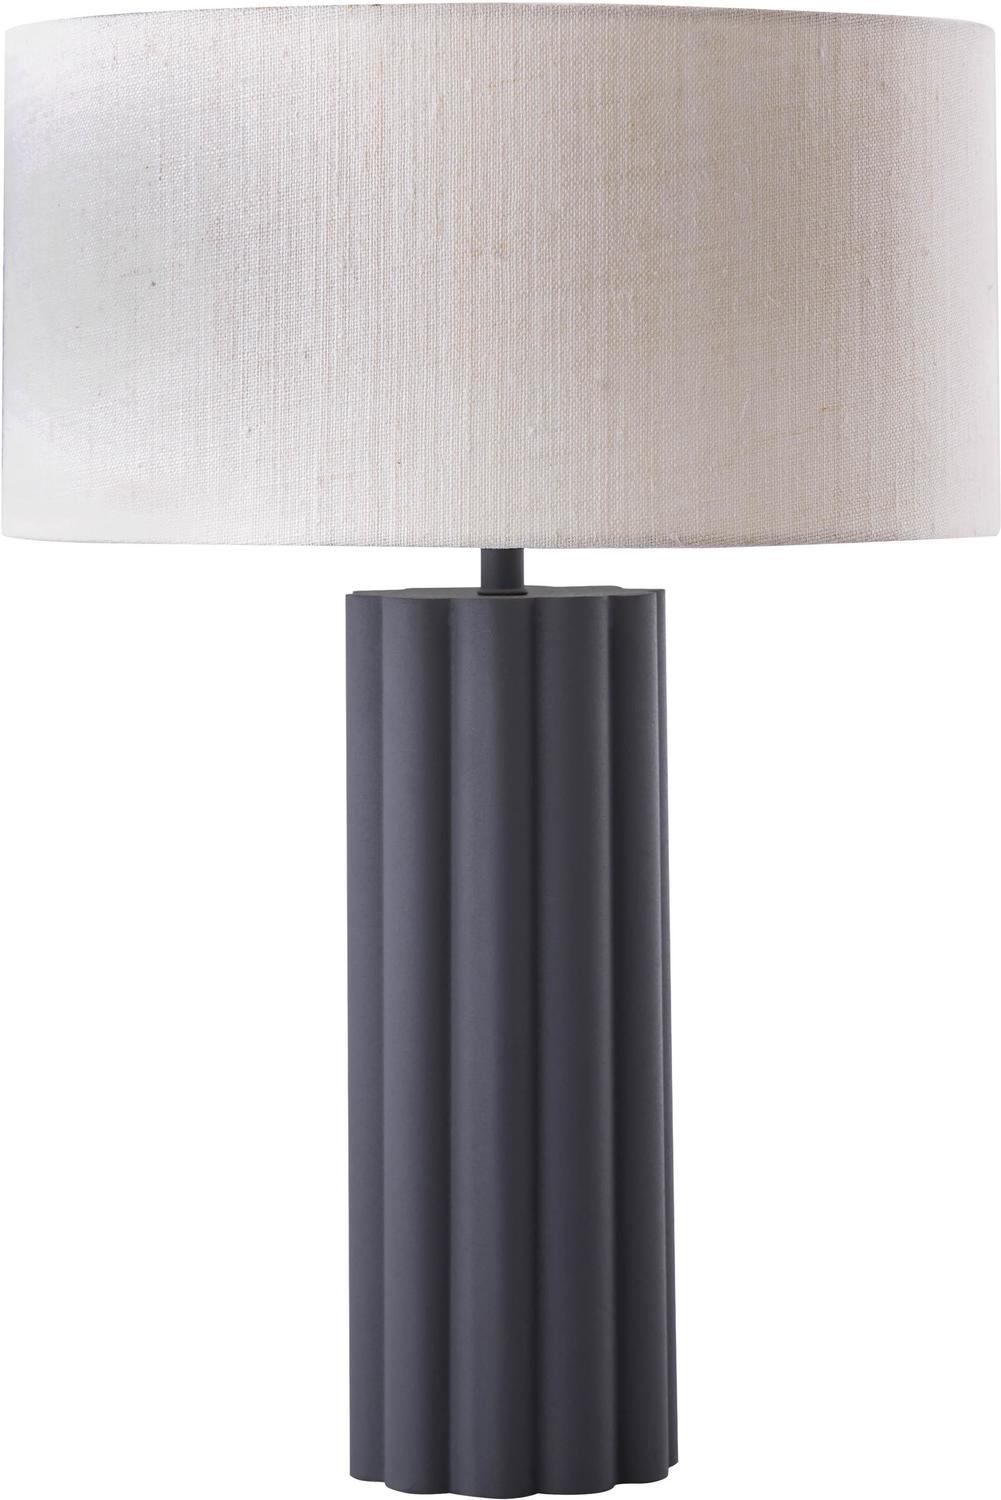 Contemporary Design Furniture Table Lamps Accent Tables Grey,White